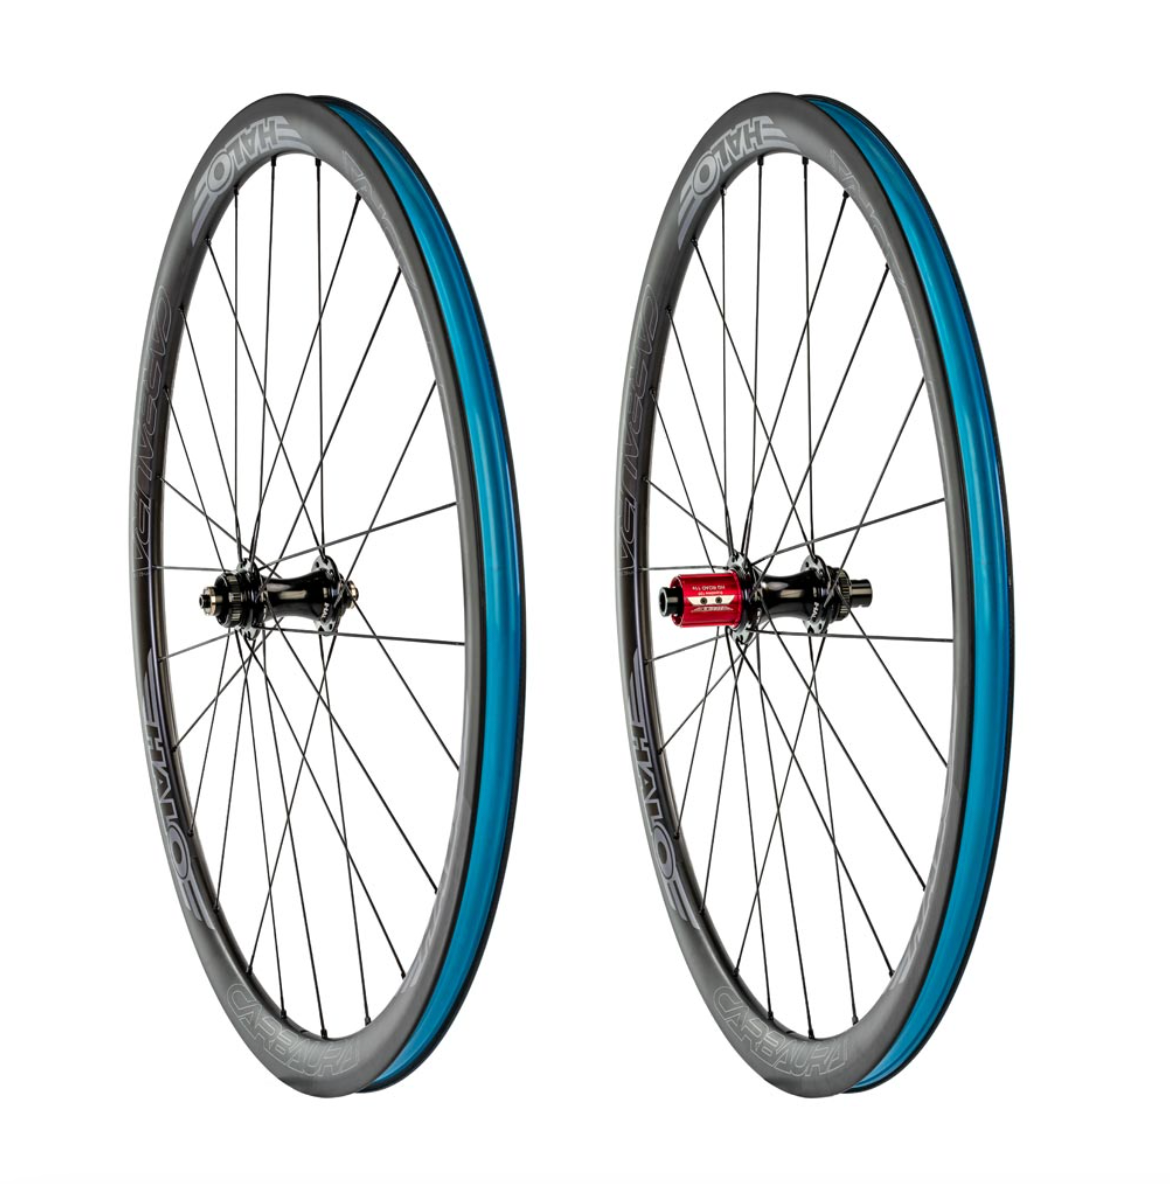 Halo Carbaura RCD 700c Wheelsets